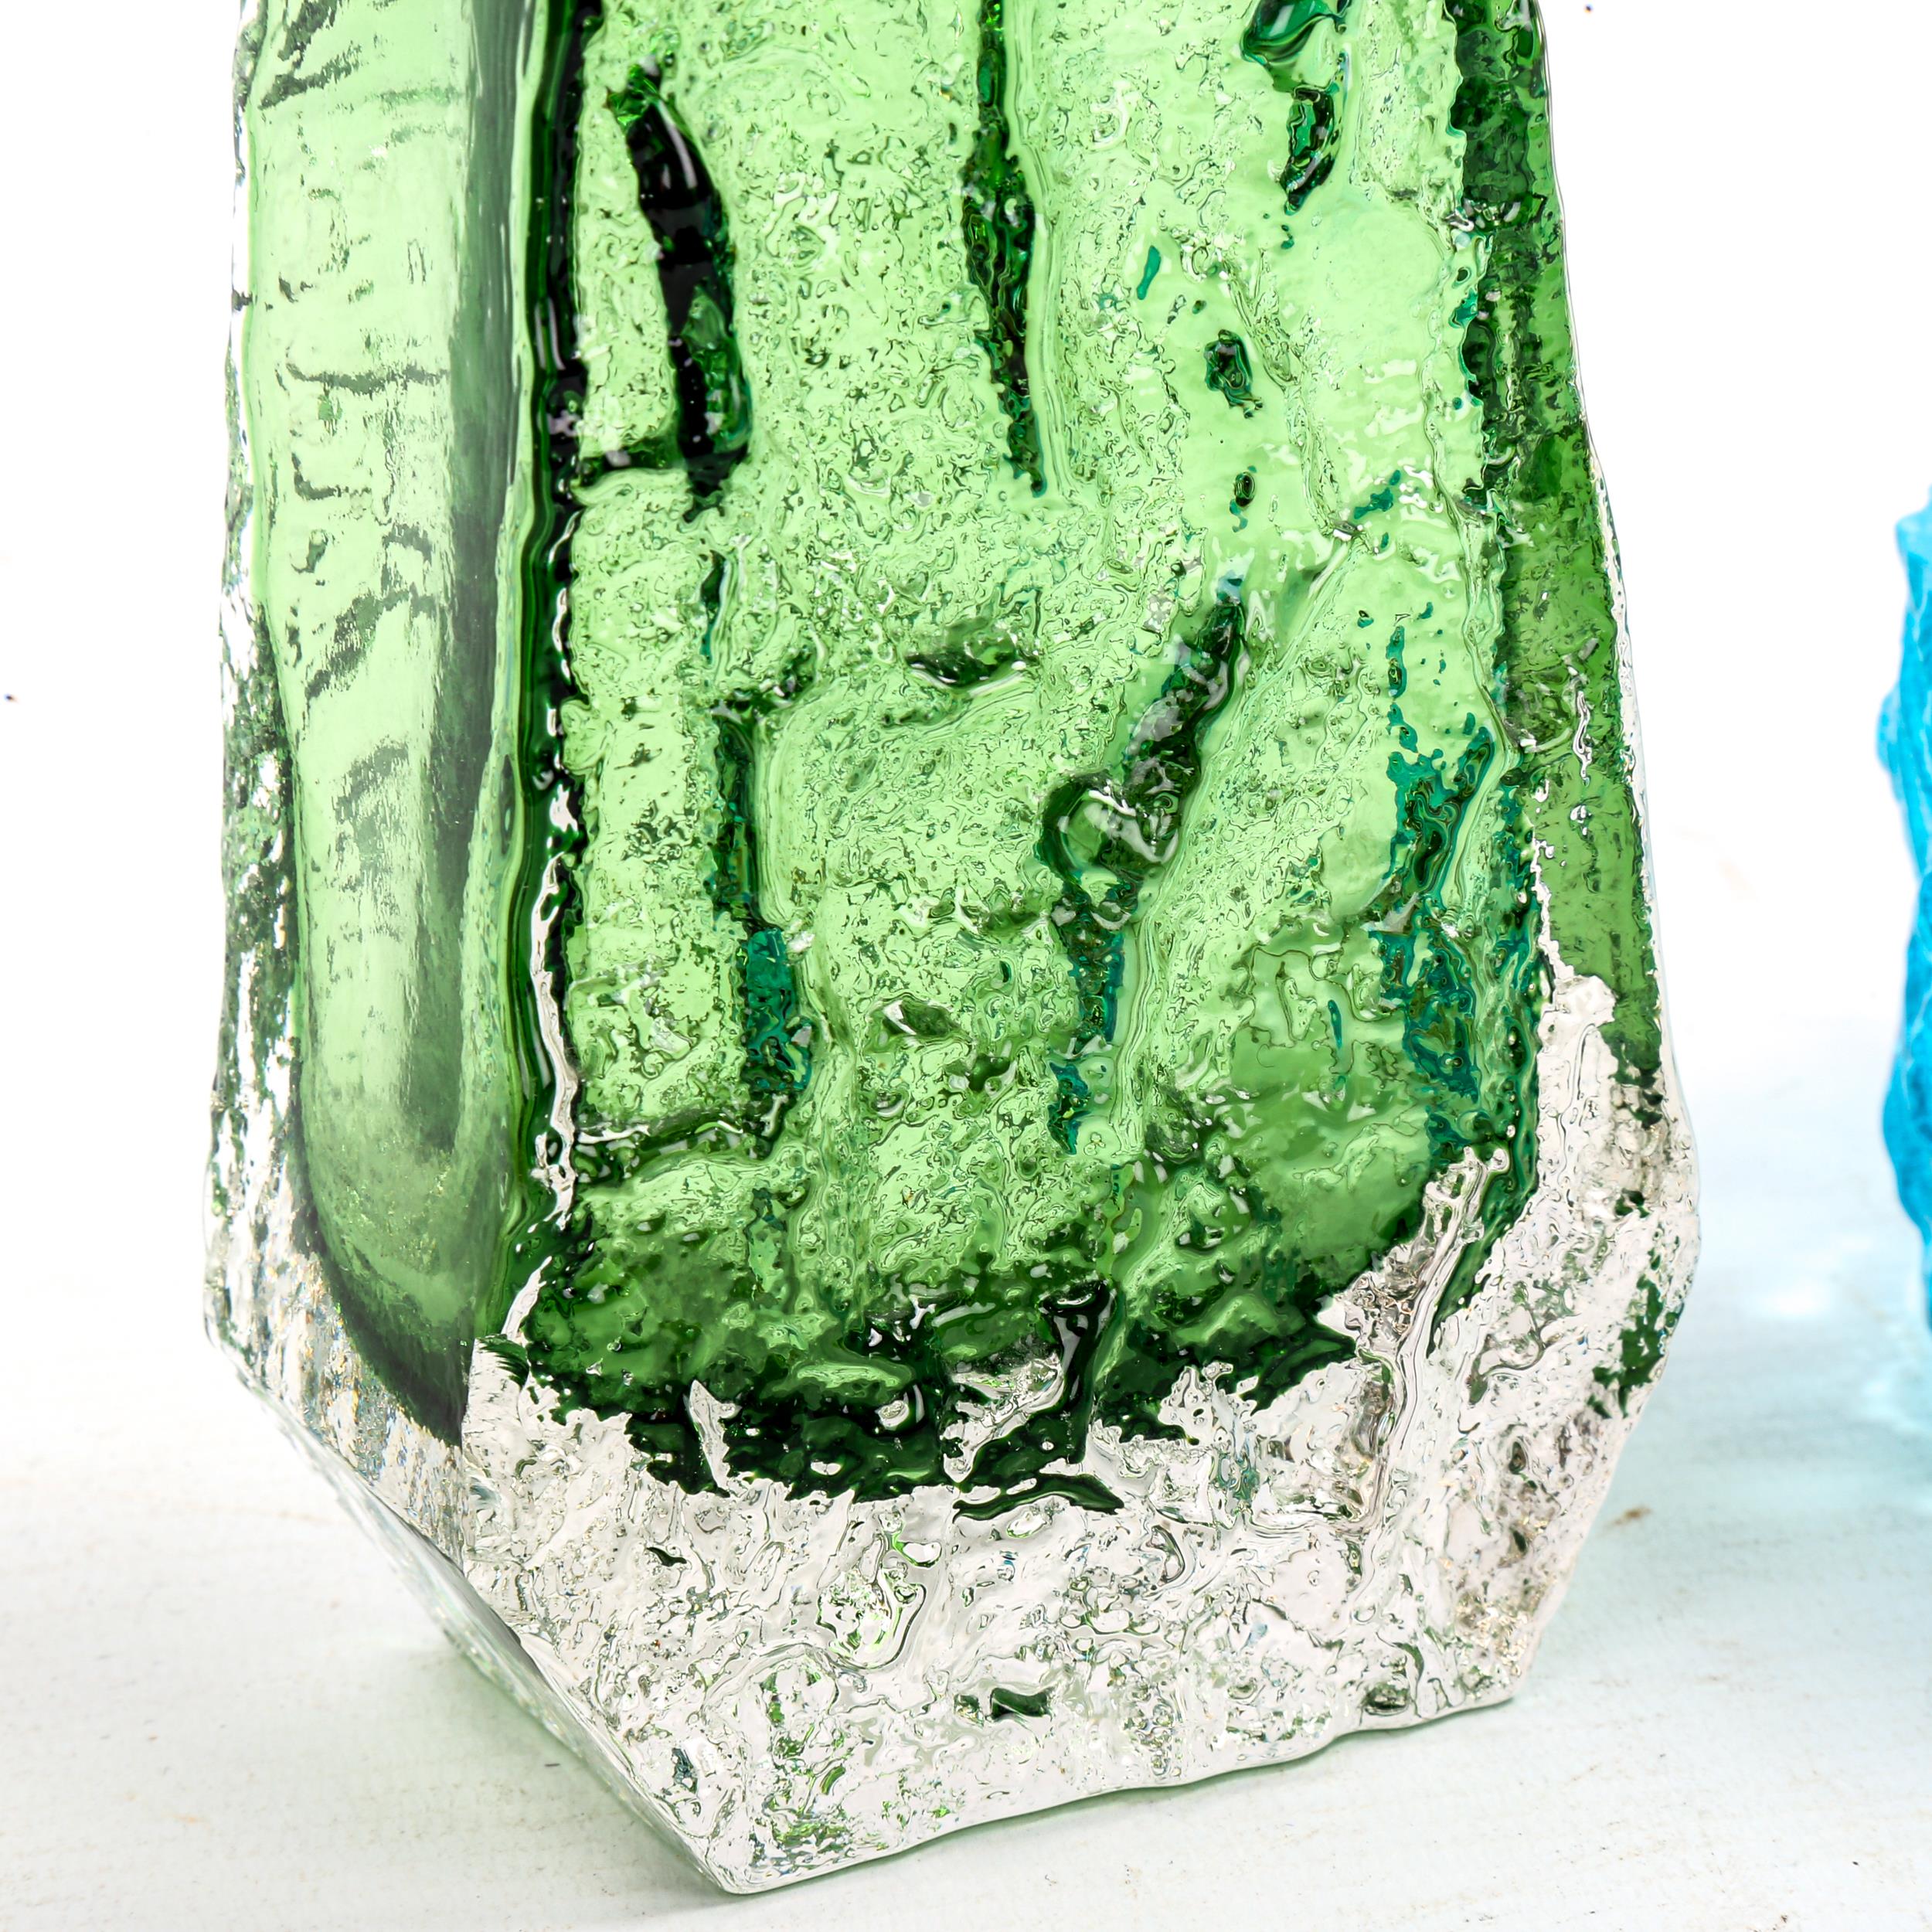 GEOFFREY BAXTER for Whitefriars glass, a green coffin vase and aqua dish, vase height 13m. both - Image 2 of 4